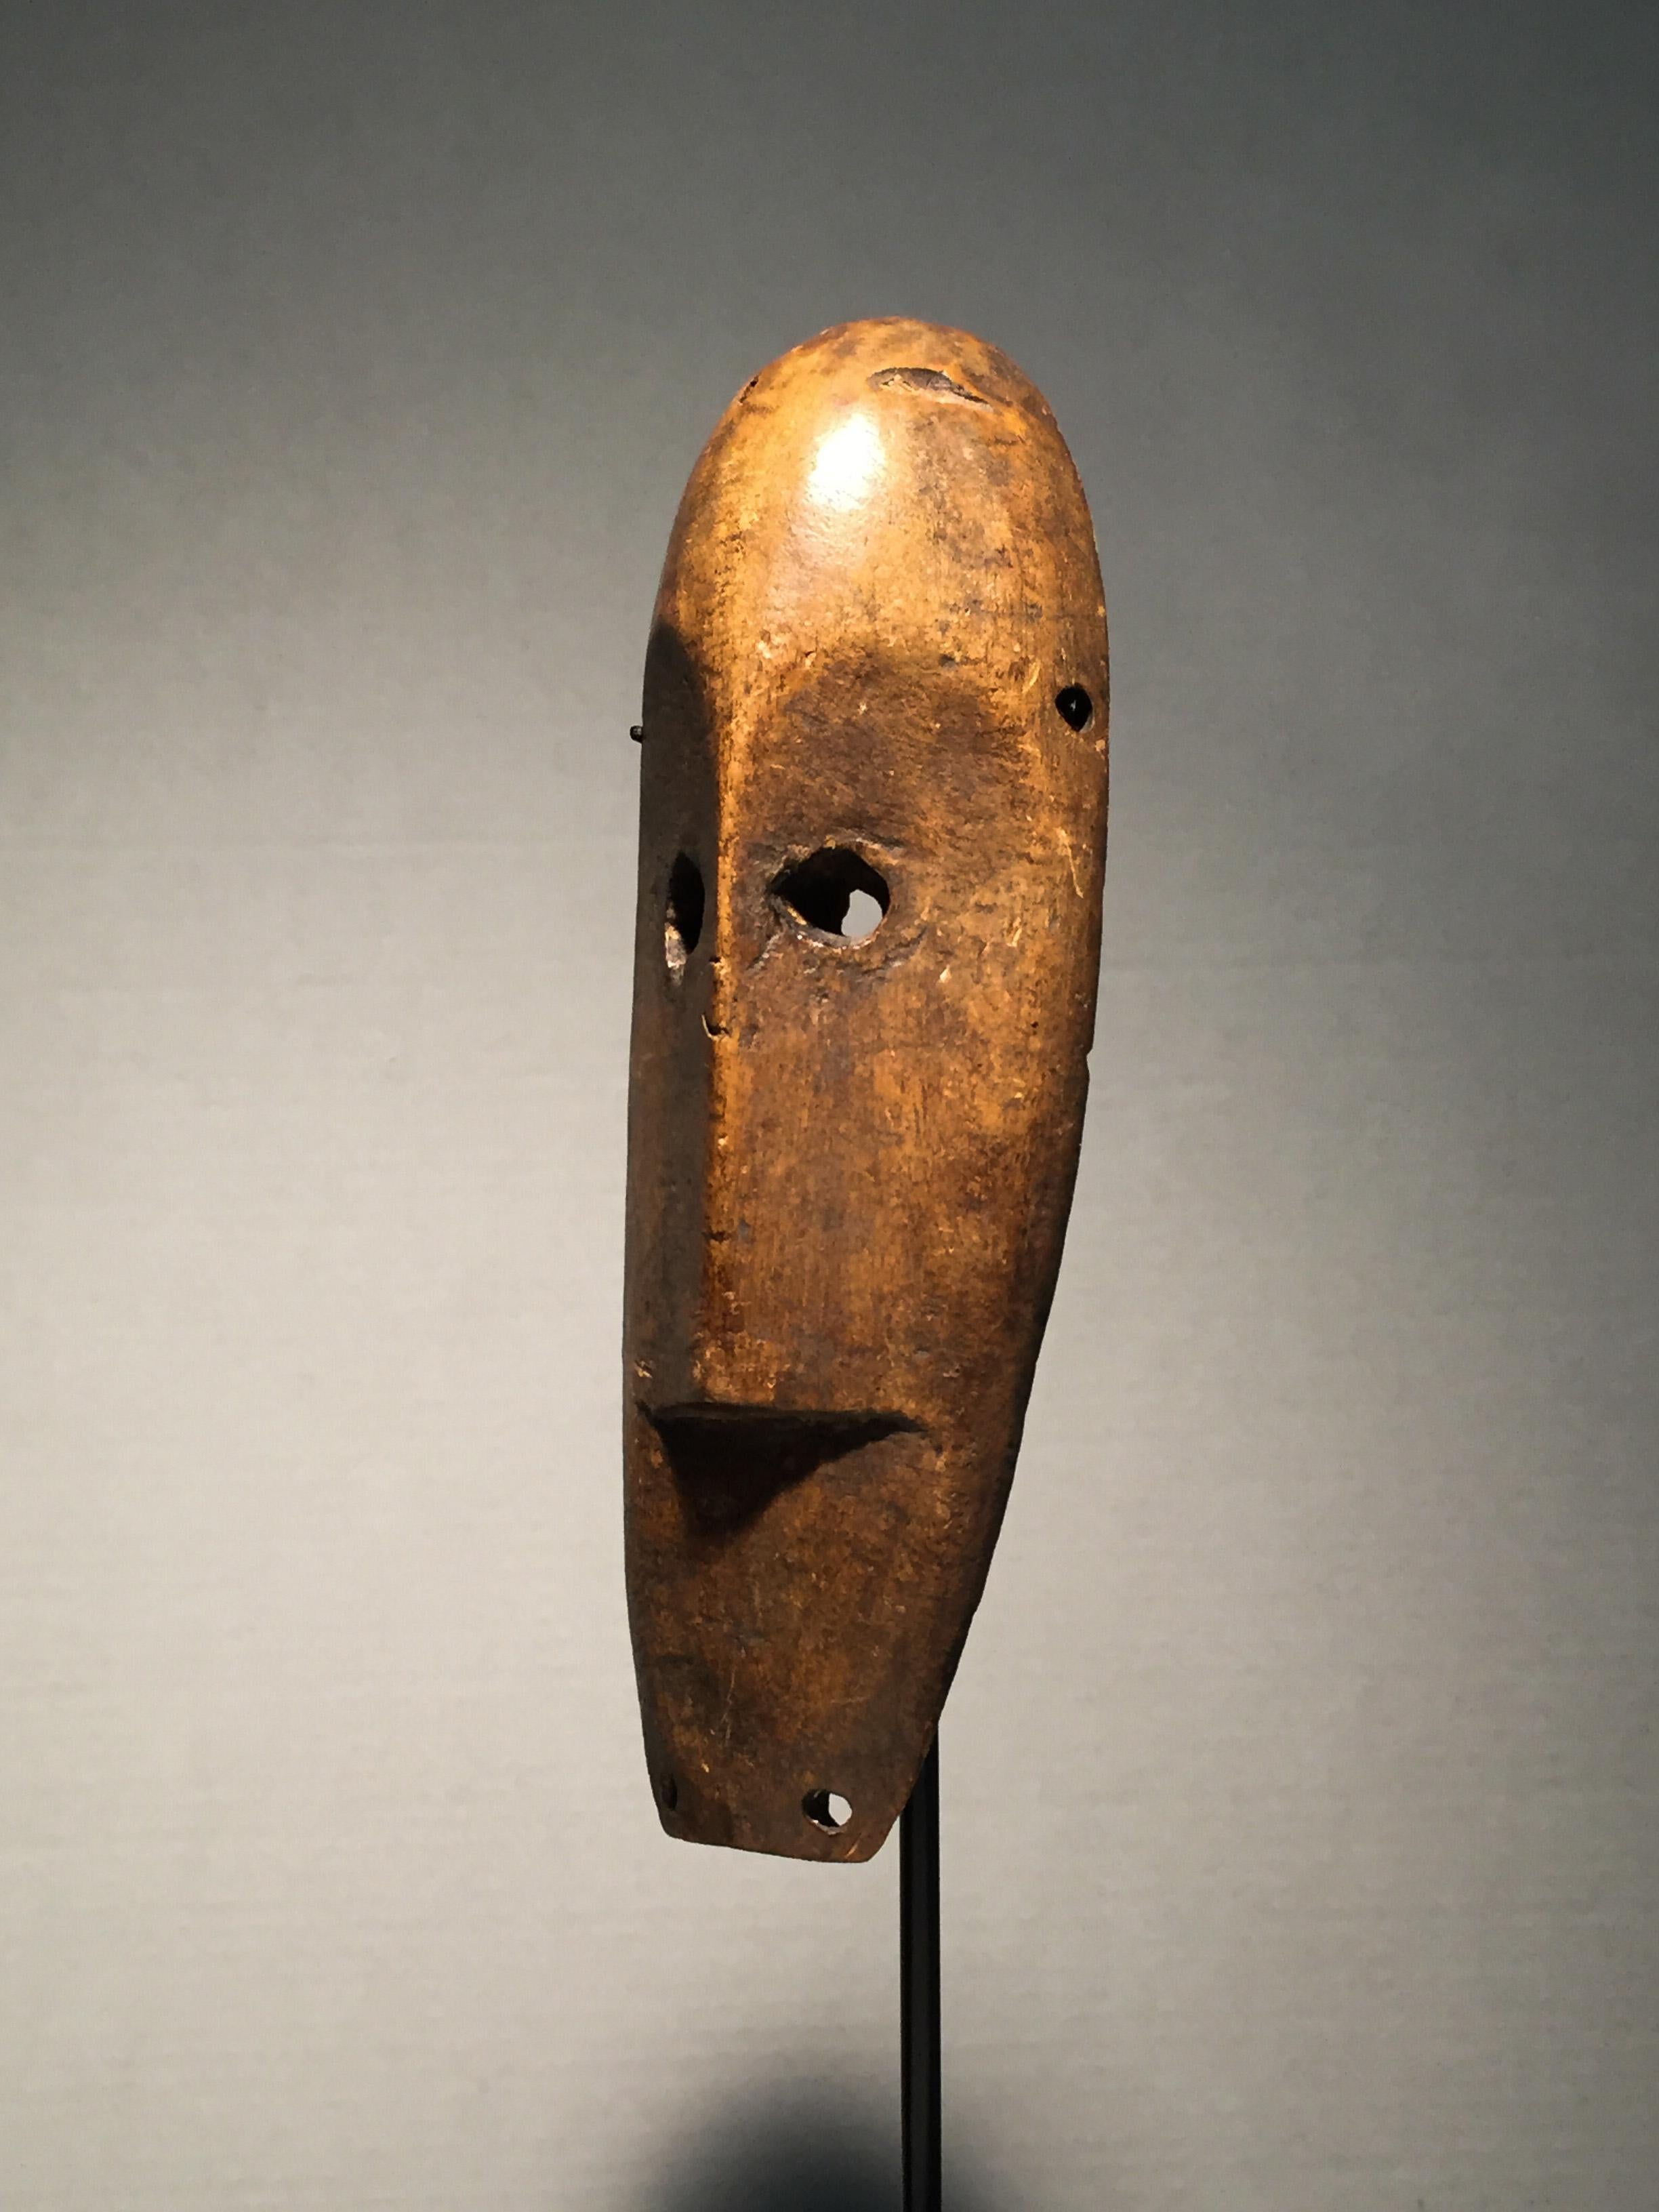 African mask from the Lengola people of the Democratic Republic of the Congo used in ceremonies of the Bwami secret society, ex collection James Stephenson, New York, NY.